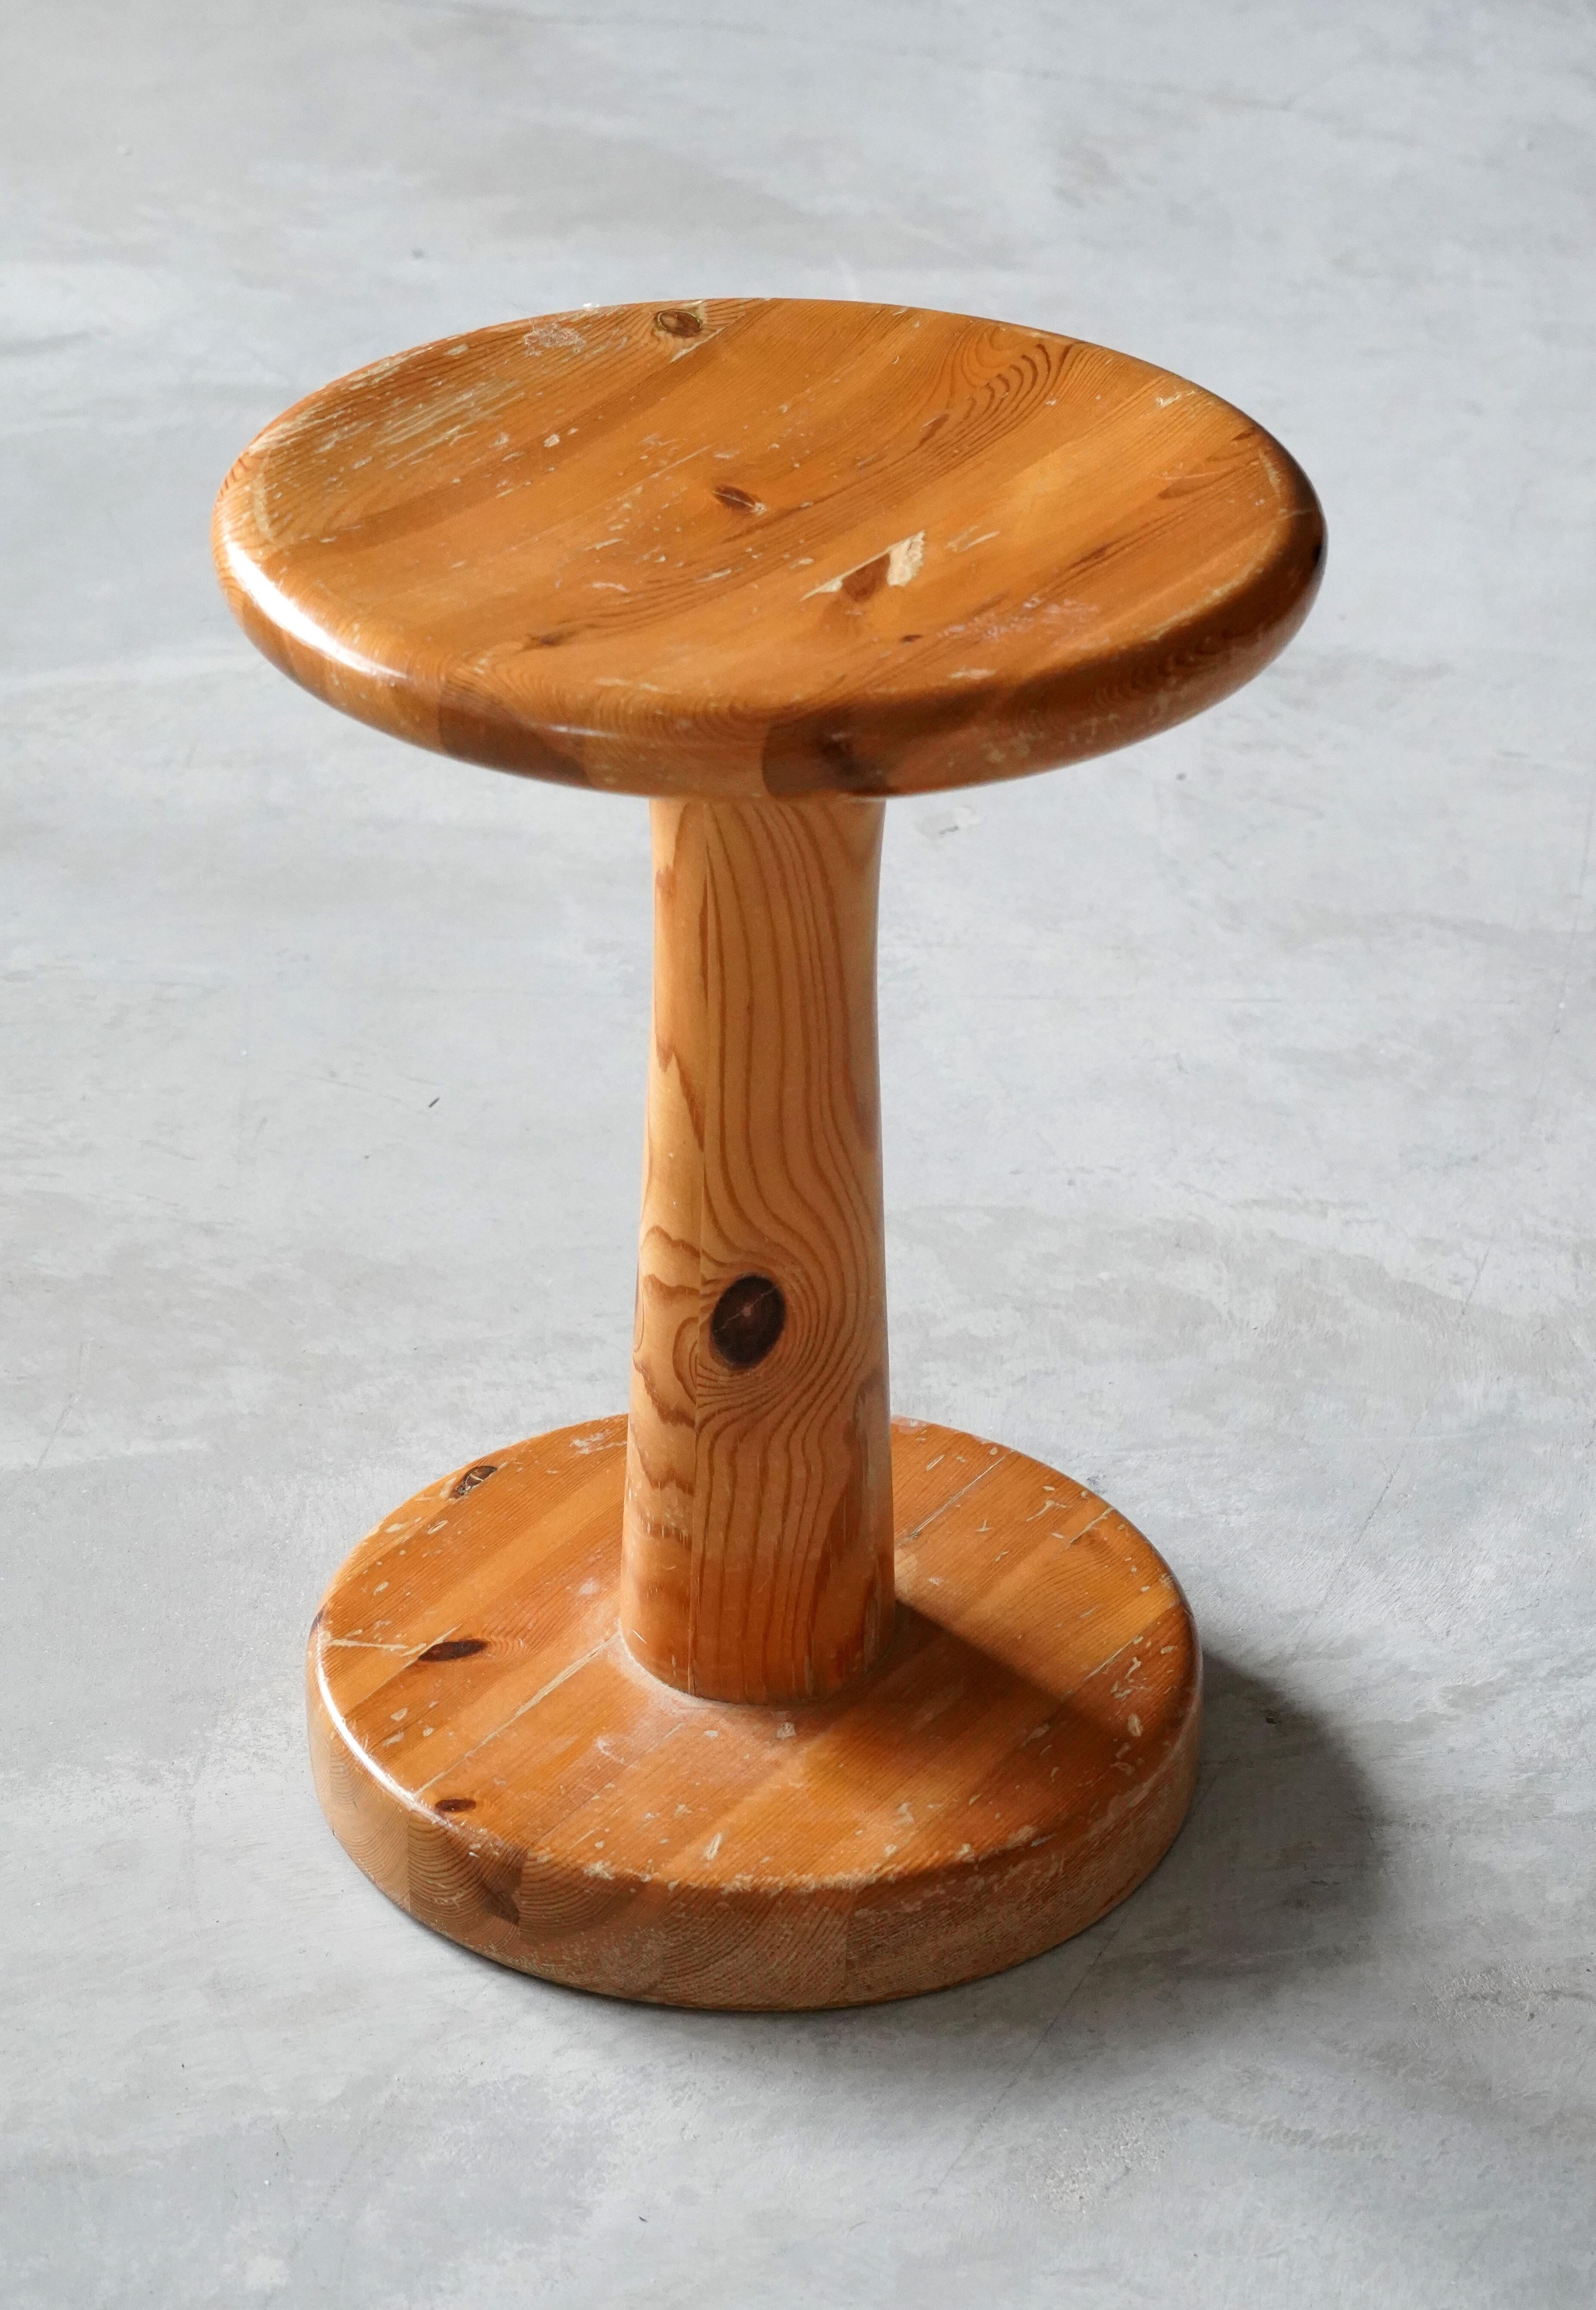 A Swedish pinewood stool or side table. By unknown designer, 1960s. Purity of form enhances the beauty of wood. 

Other designers of the period include Pierre Chapo, Charlotte Perriand, Axel Einar Hjorth, and Kaare Klint.





 